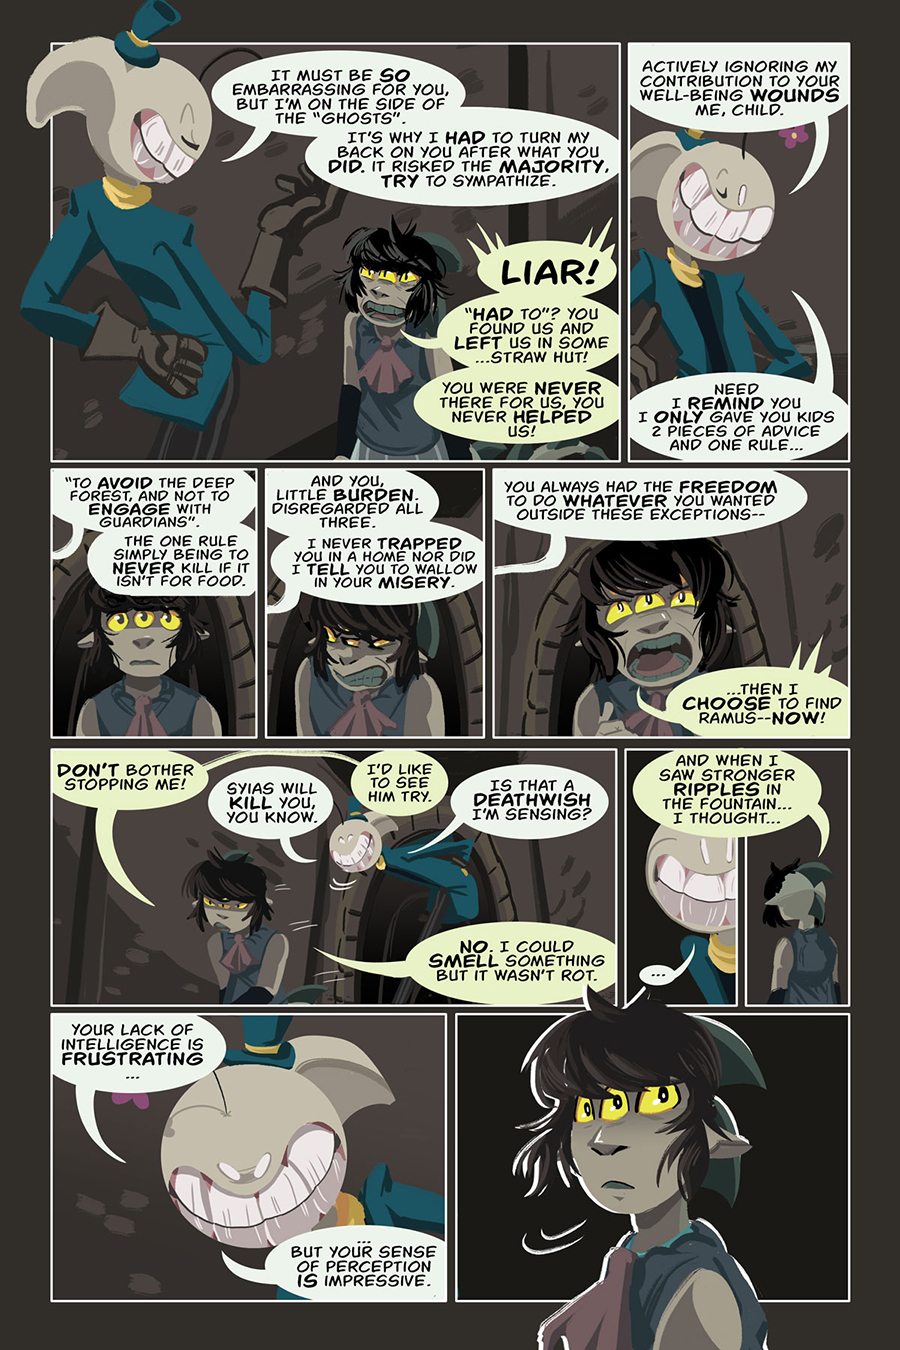 Chapter 8, page 27